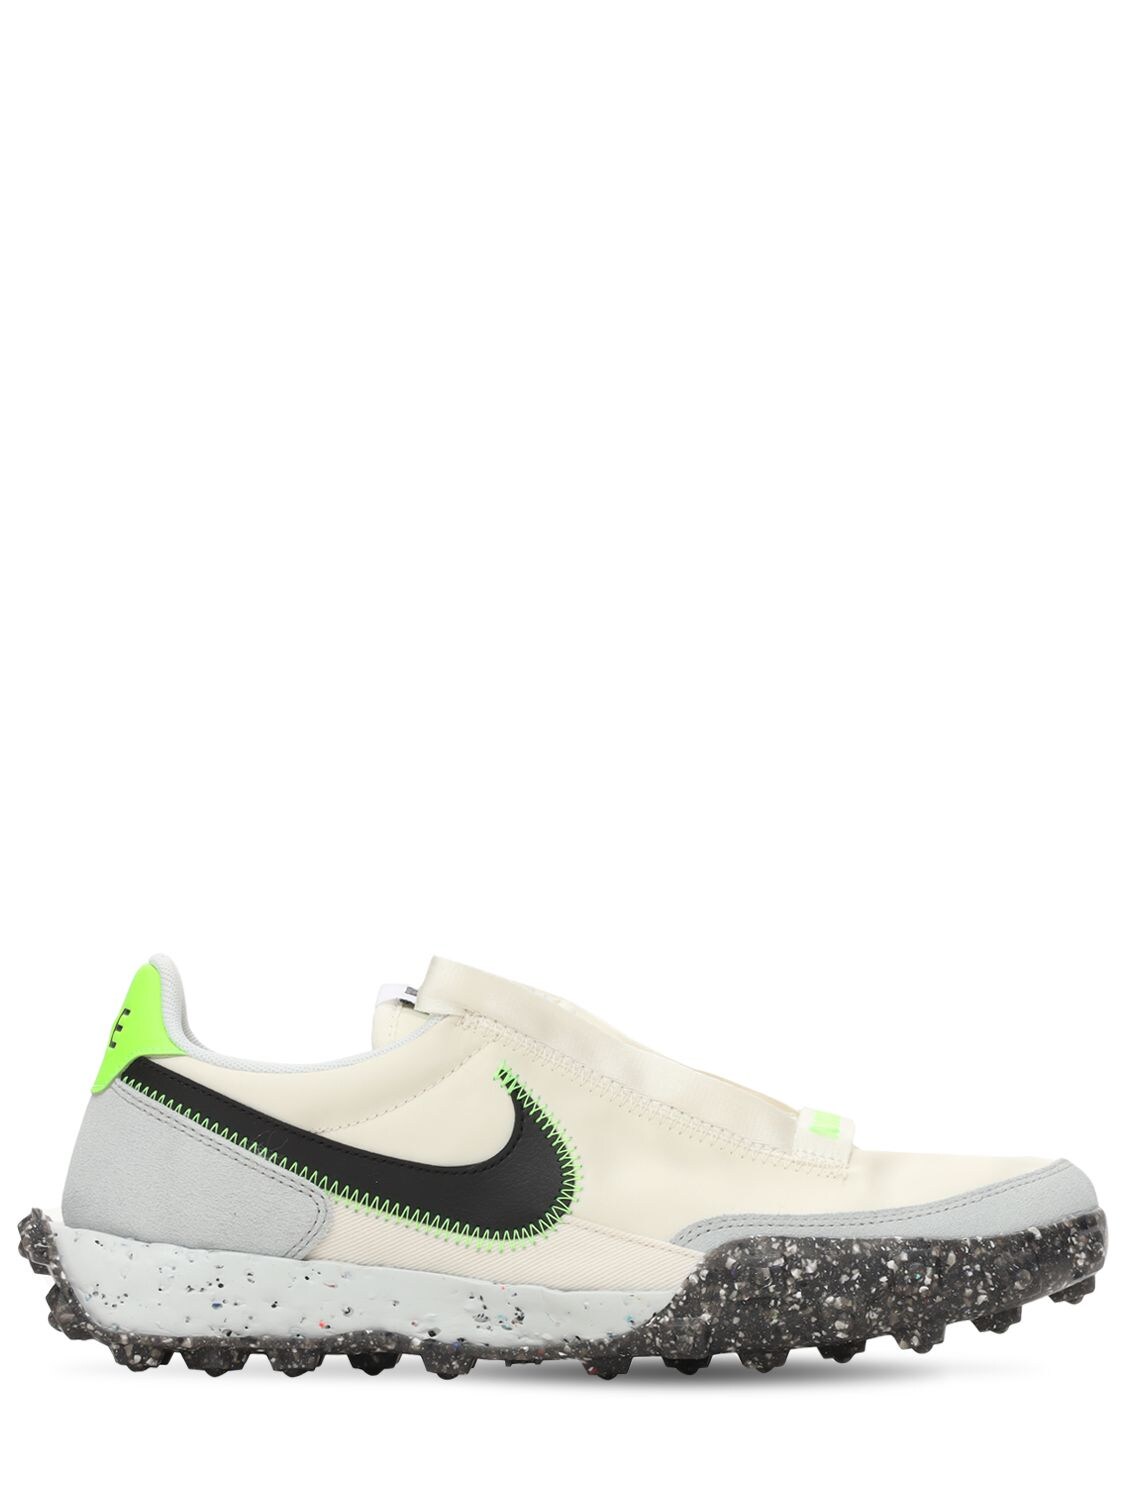 NIKE WAFFLE RACER CRATER trainers,73IDL1005-MTAY0